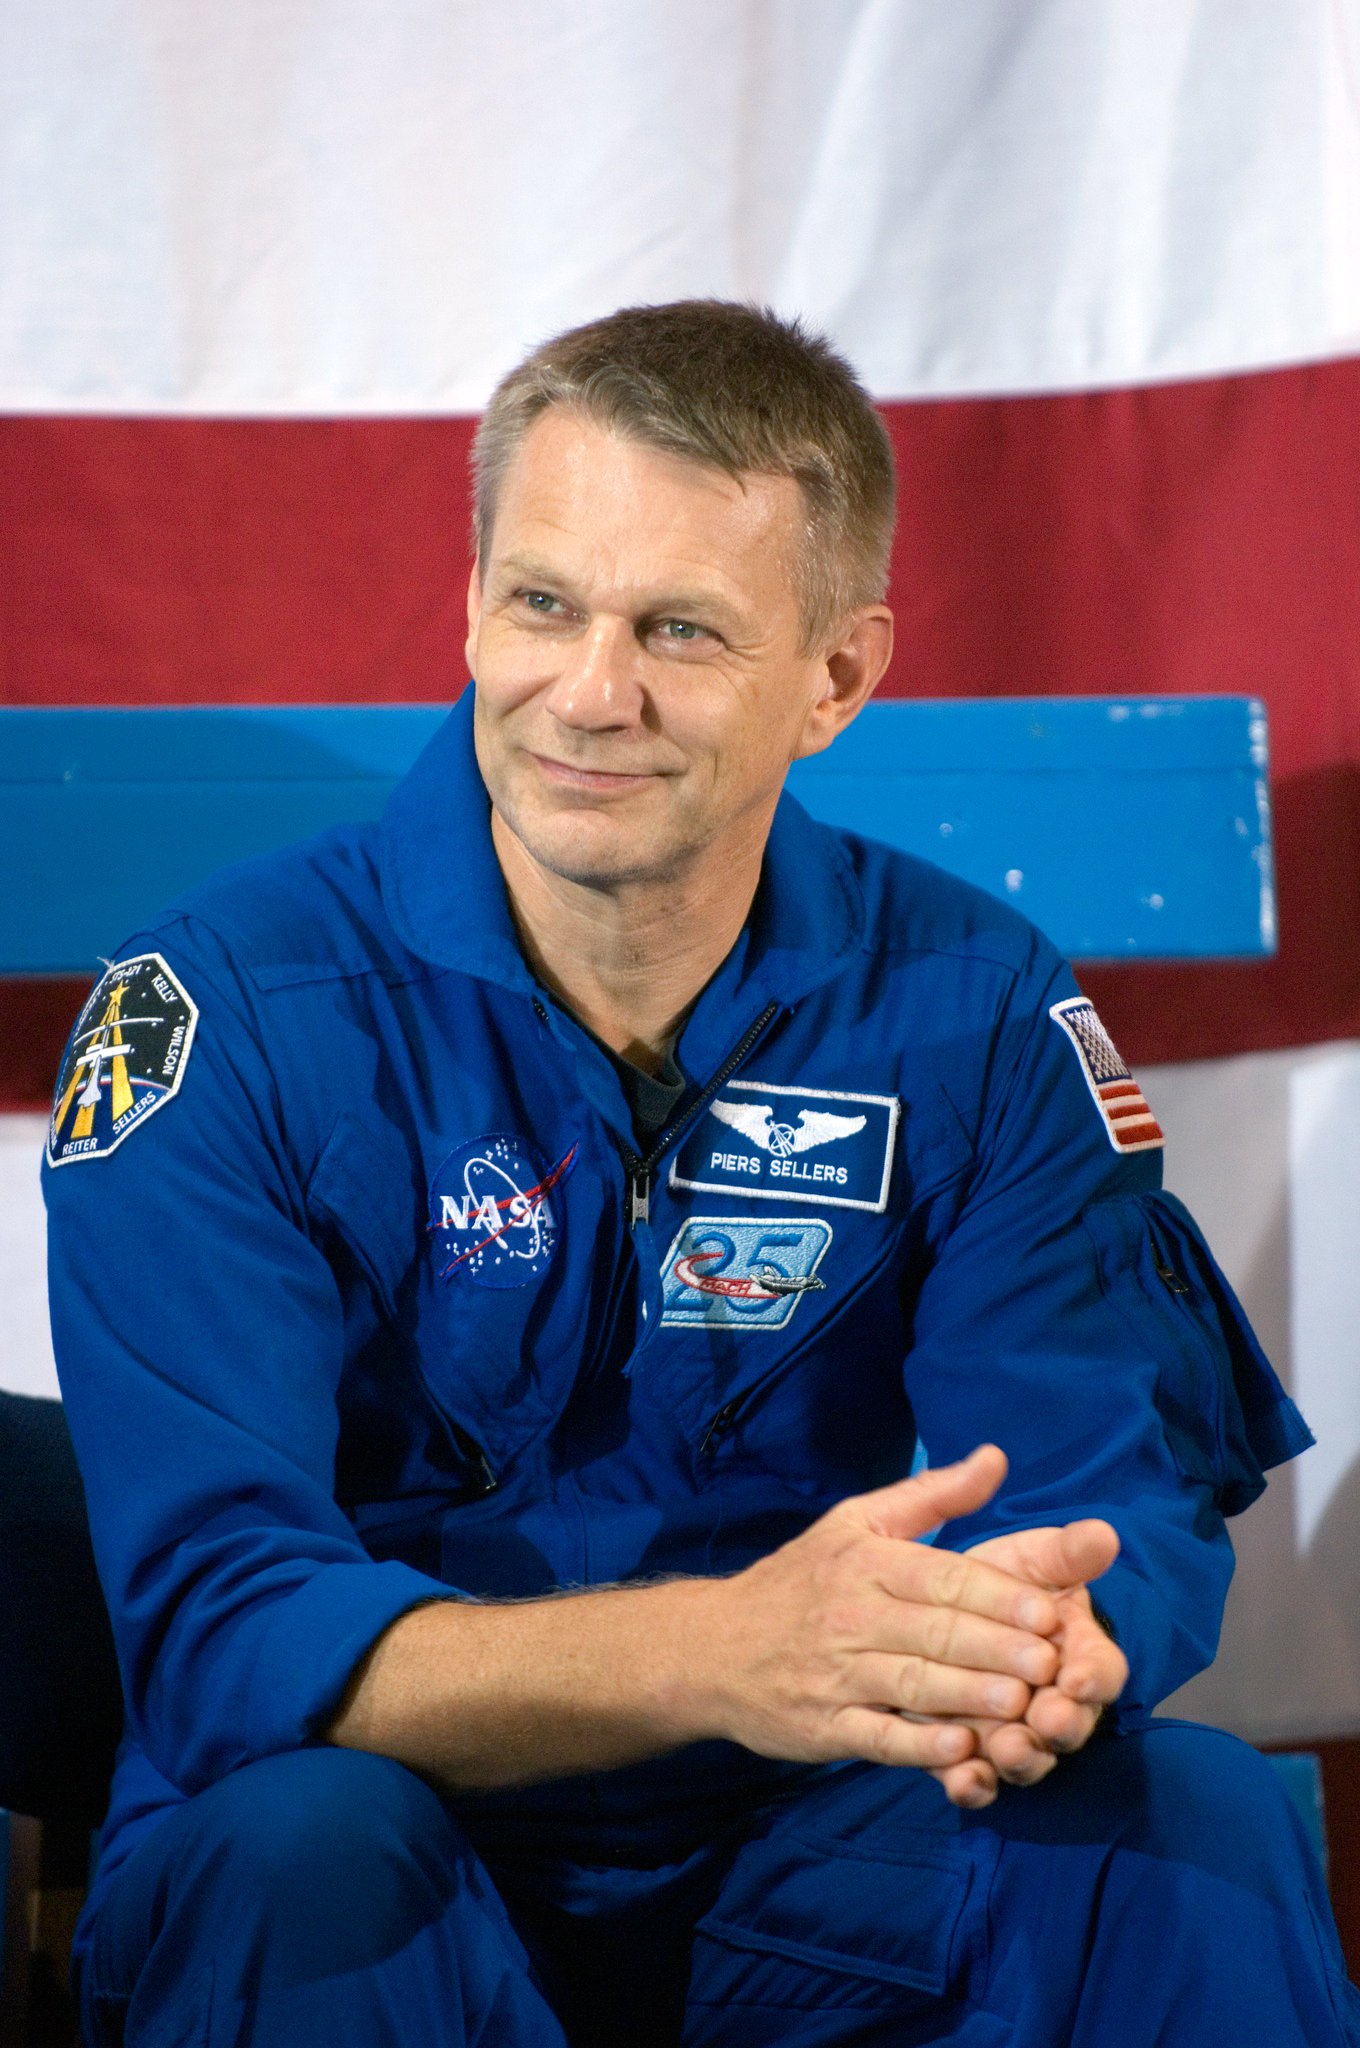 Happy birthday to a great scientist, astronaut, friend . . . . Human. RIP Piers Sellers. 